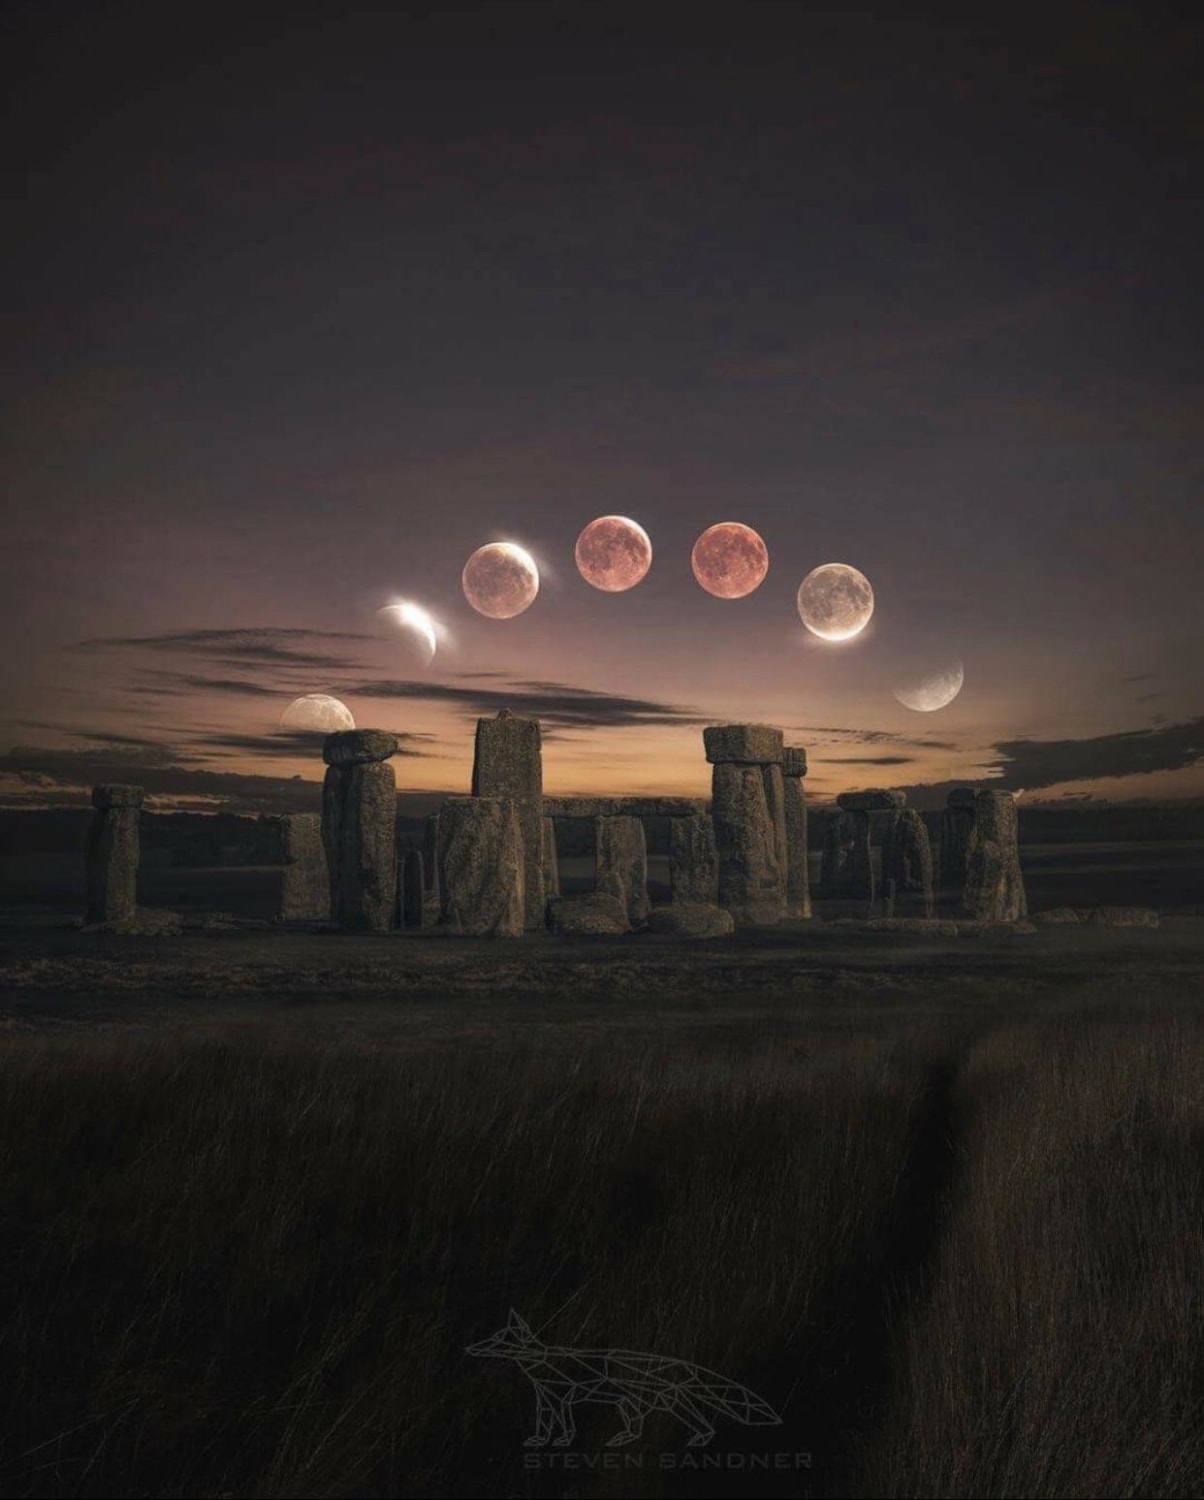 Blood Moon Eclipse over Stonehenge using 35 pictures to complete the image by Steve Sandner